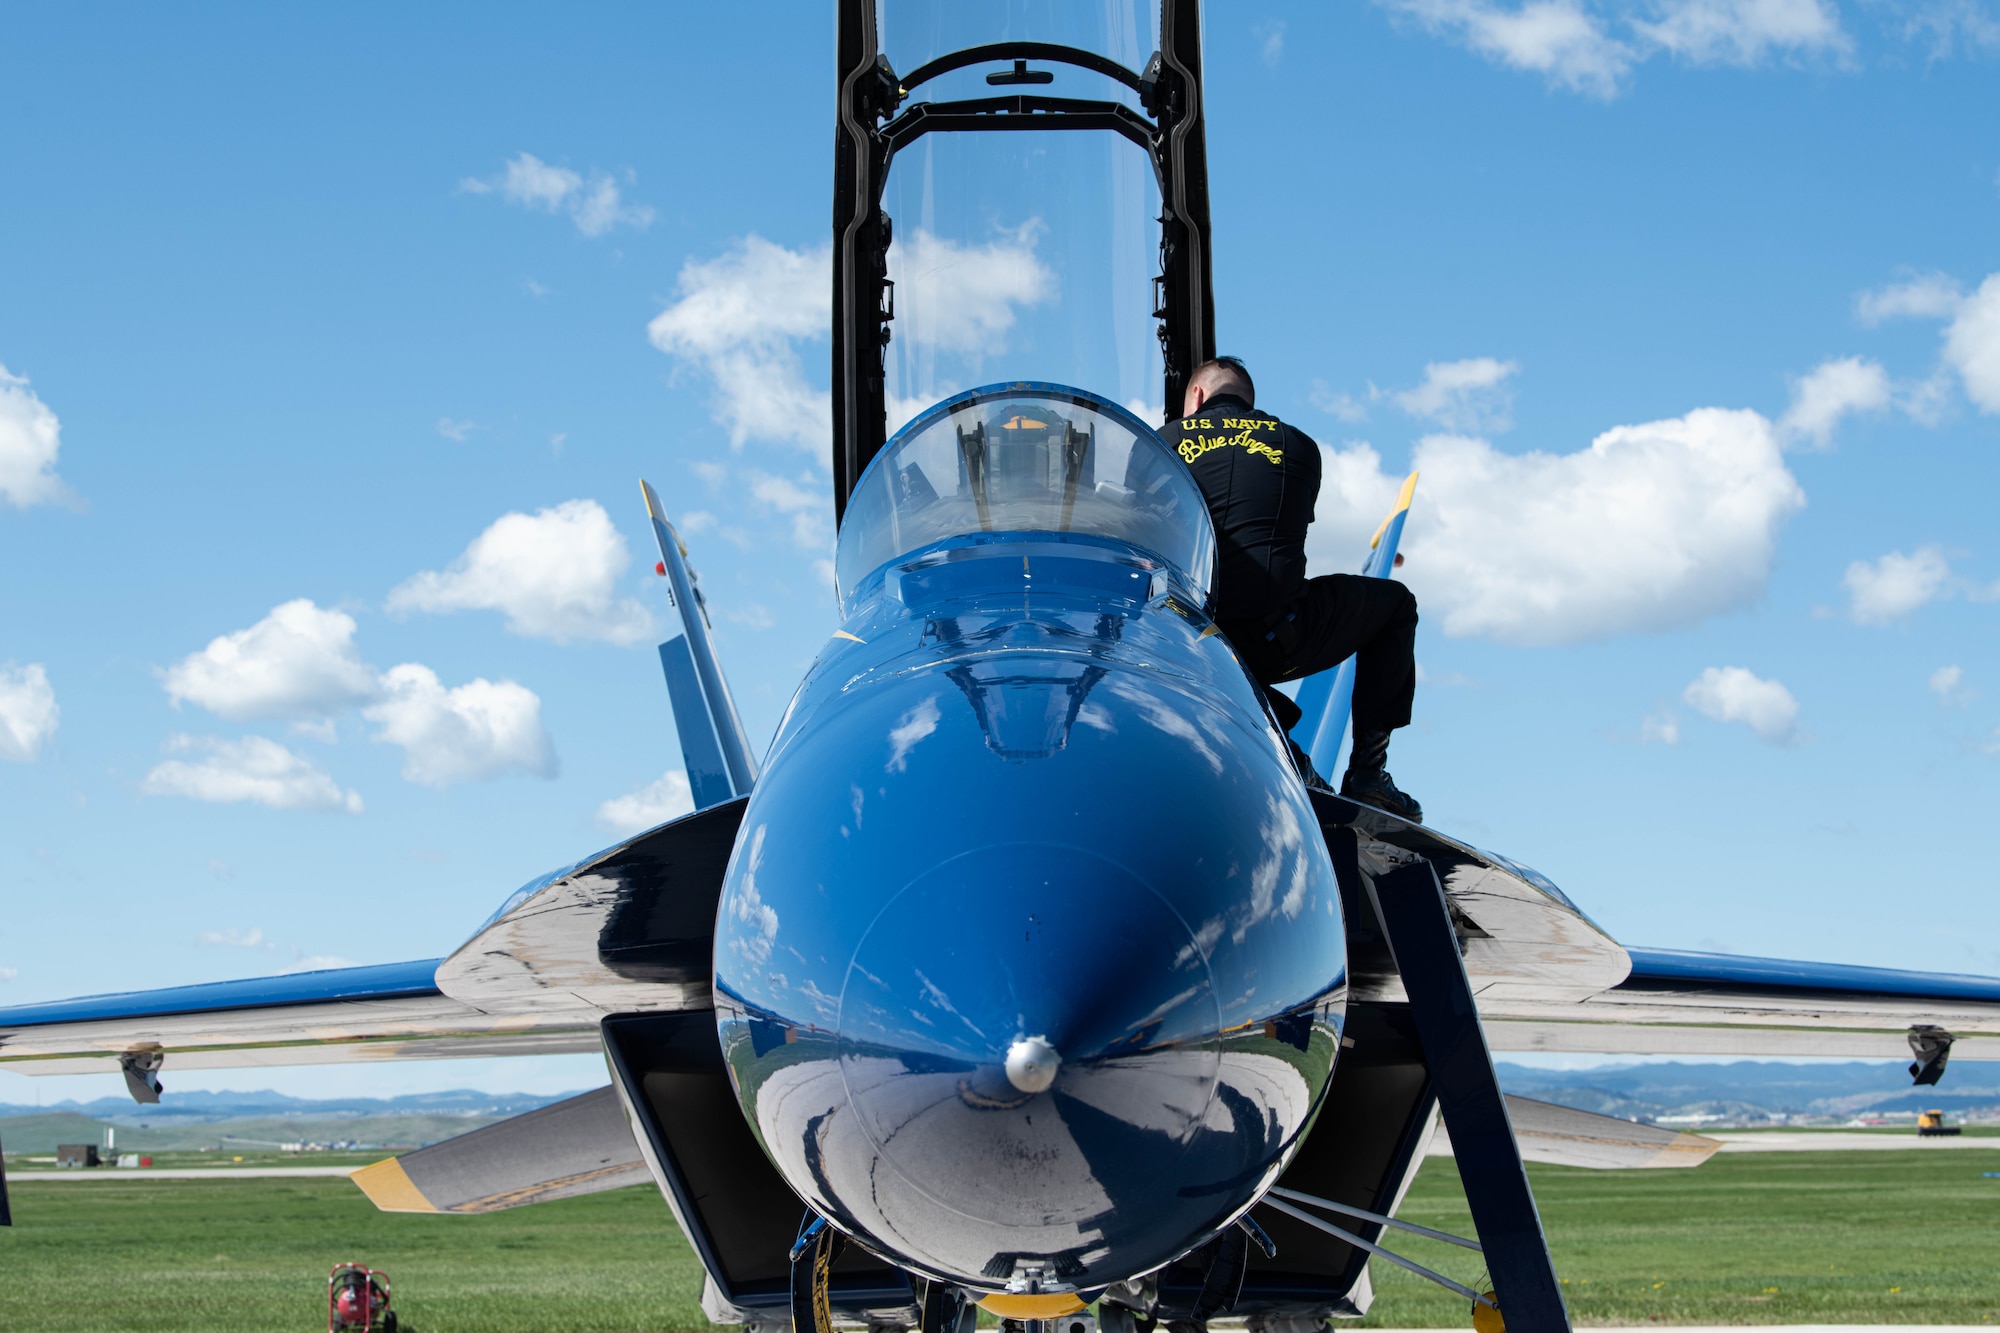 A pilot from the U.S. Navy Flight Demonstration Squadron, the Blue Angels, prepares an F/A-18 Super Hornet for flight during the 2022 Ellsworth Air and Space Show at Ellsworth Air Force Base, S.D., May 13, 2022. The two-day event provided the local community a rare chance to see modern and historic aircraft up close and meet Ellsworth Air Force Base Airmen. (U.S. Air Force photo by Senior Airman Quentin Marx)